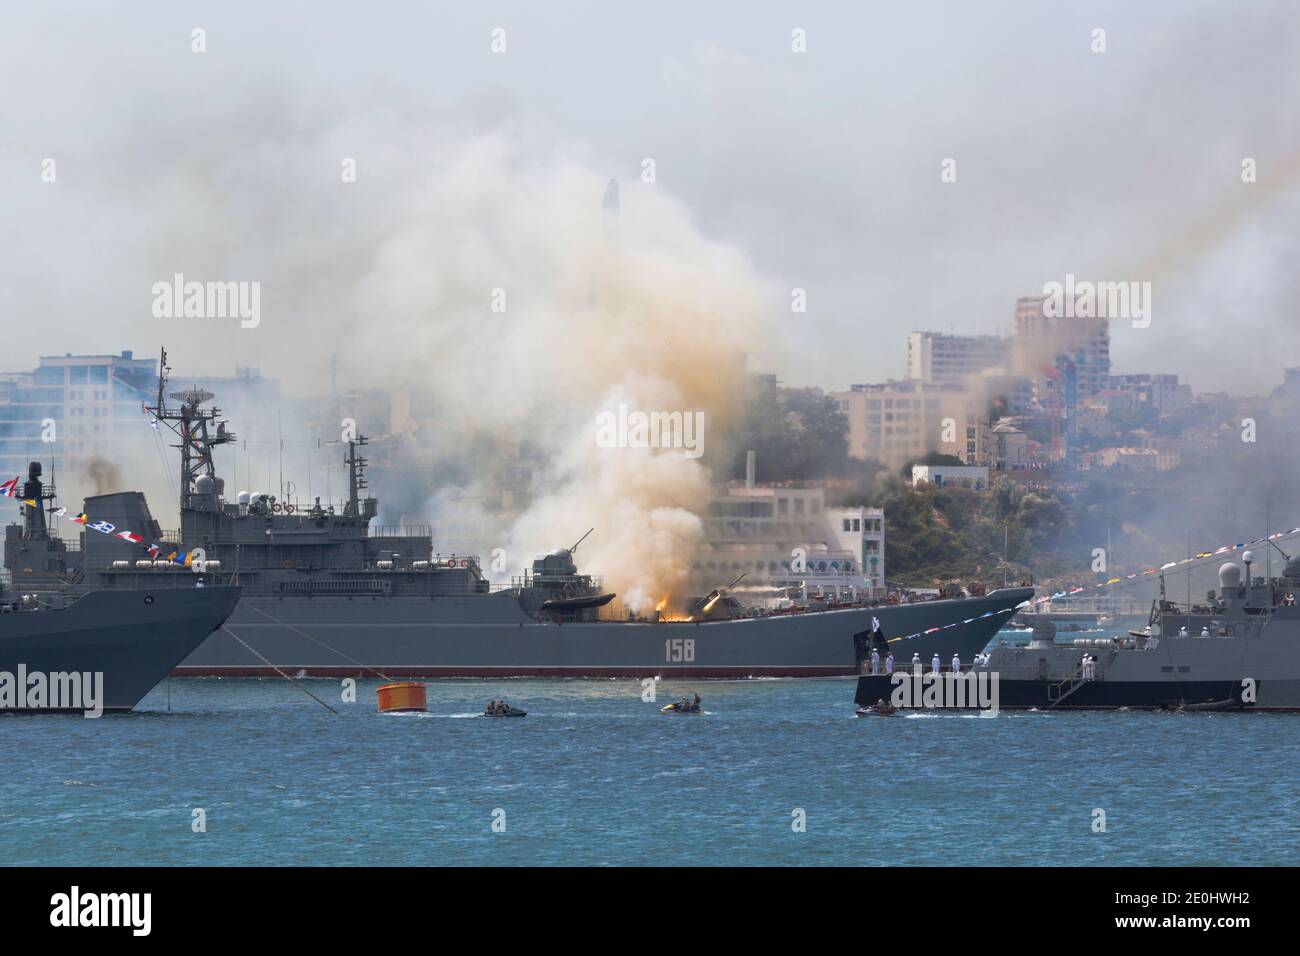 Sevastopol, Crimea, Russia - July 26, 2020: A projectile takes off from the Grad-M multiple launch rocket system of the large landing ship Caesar Kuni Stock Photo